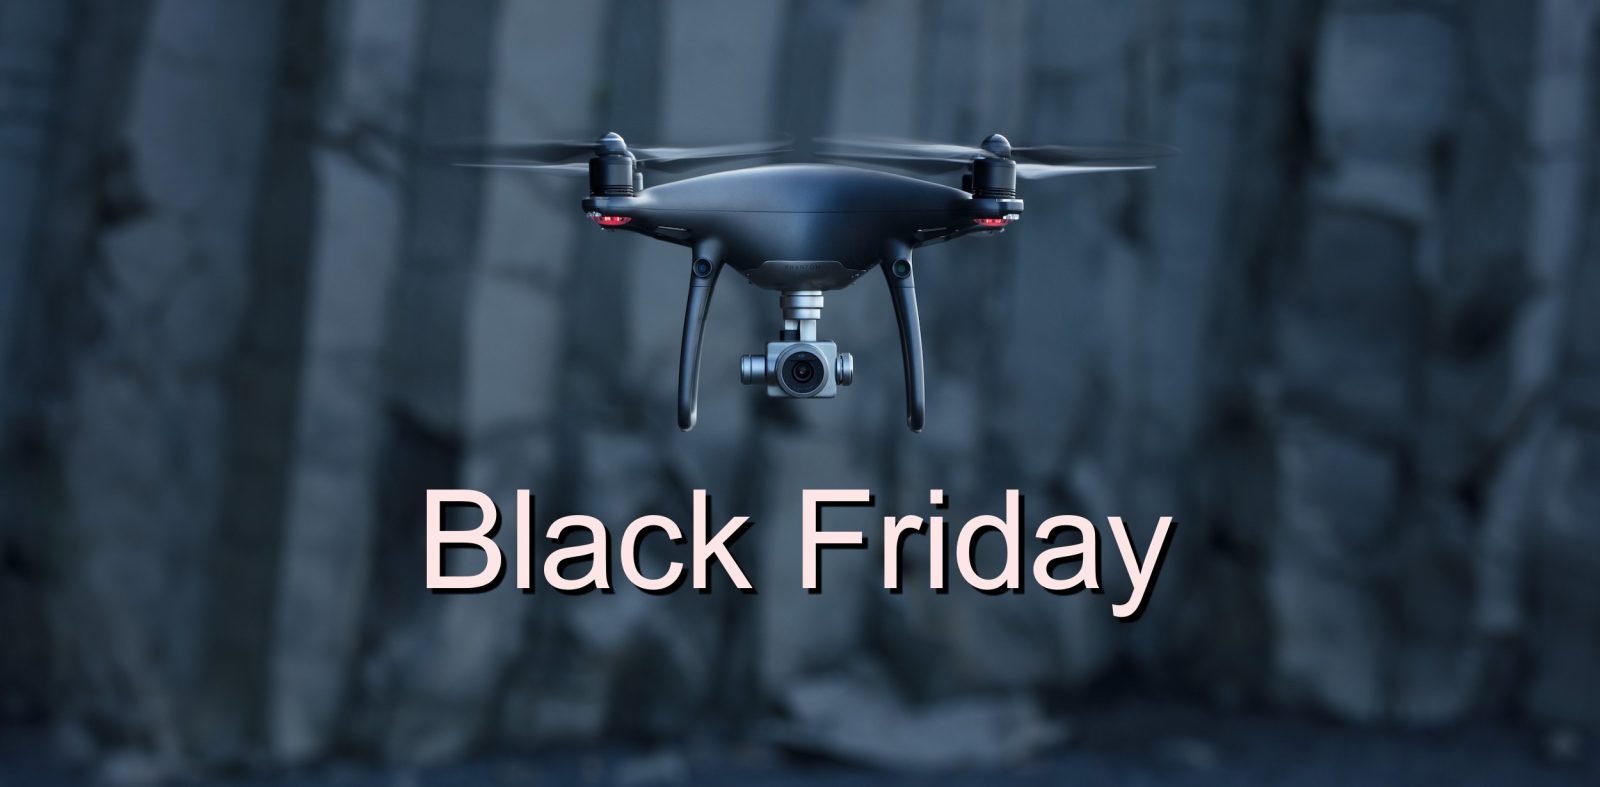 DJI Reveals 2017 Black Friday Product Promotions Discounted Prices On DJI Drones, Handheld Image Stabilizers And Exclusive Bundle Offers